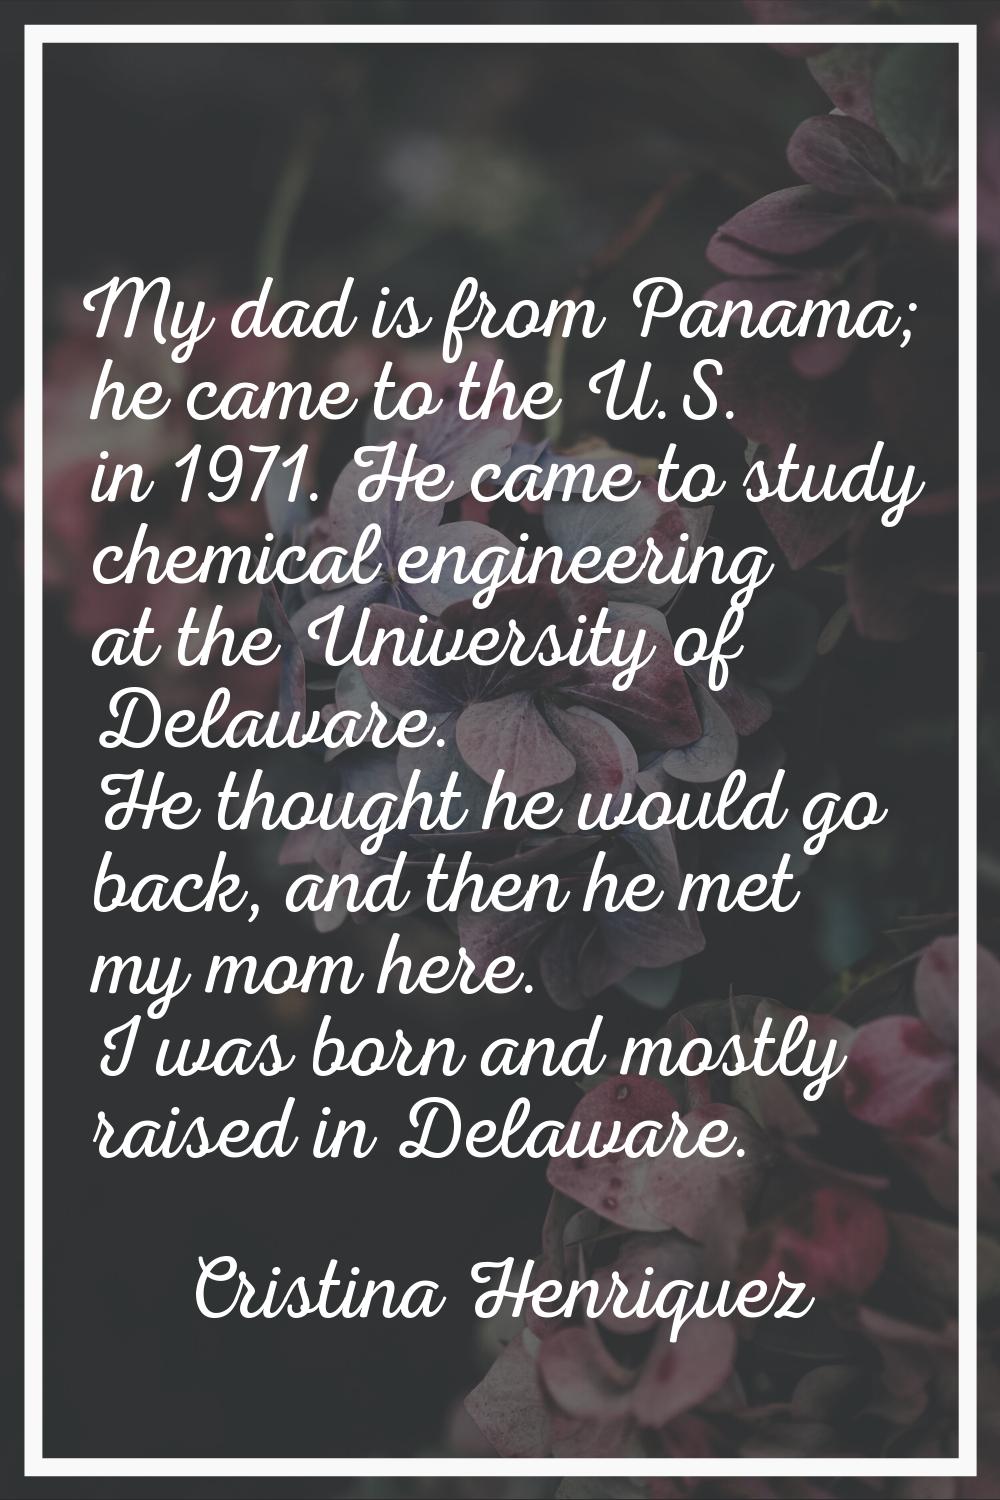 My dad is from Panama; he came to the U.S. in 1971. He came to study chemical engineering at the Un